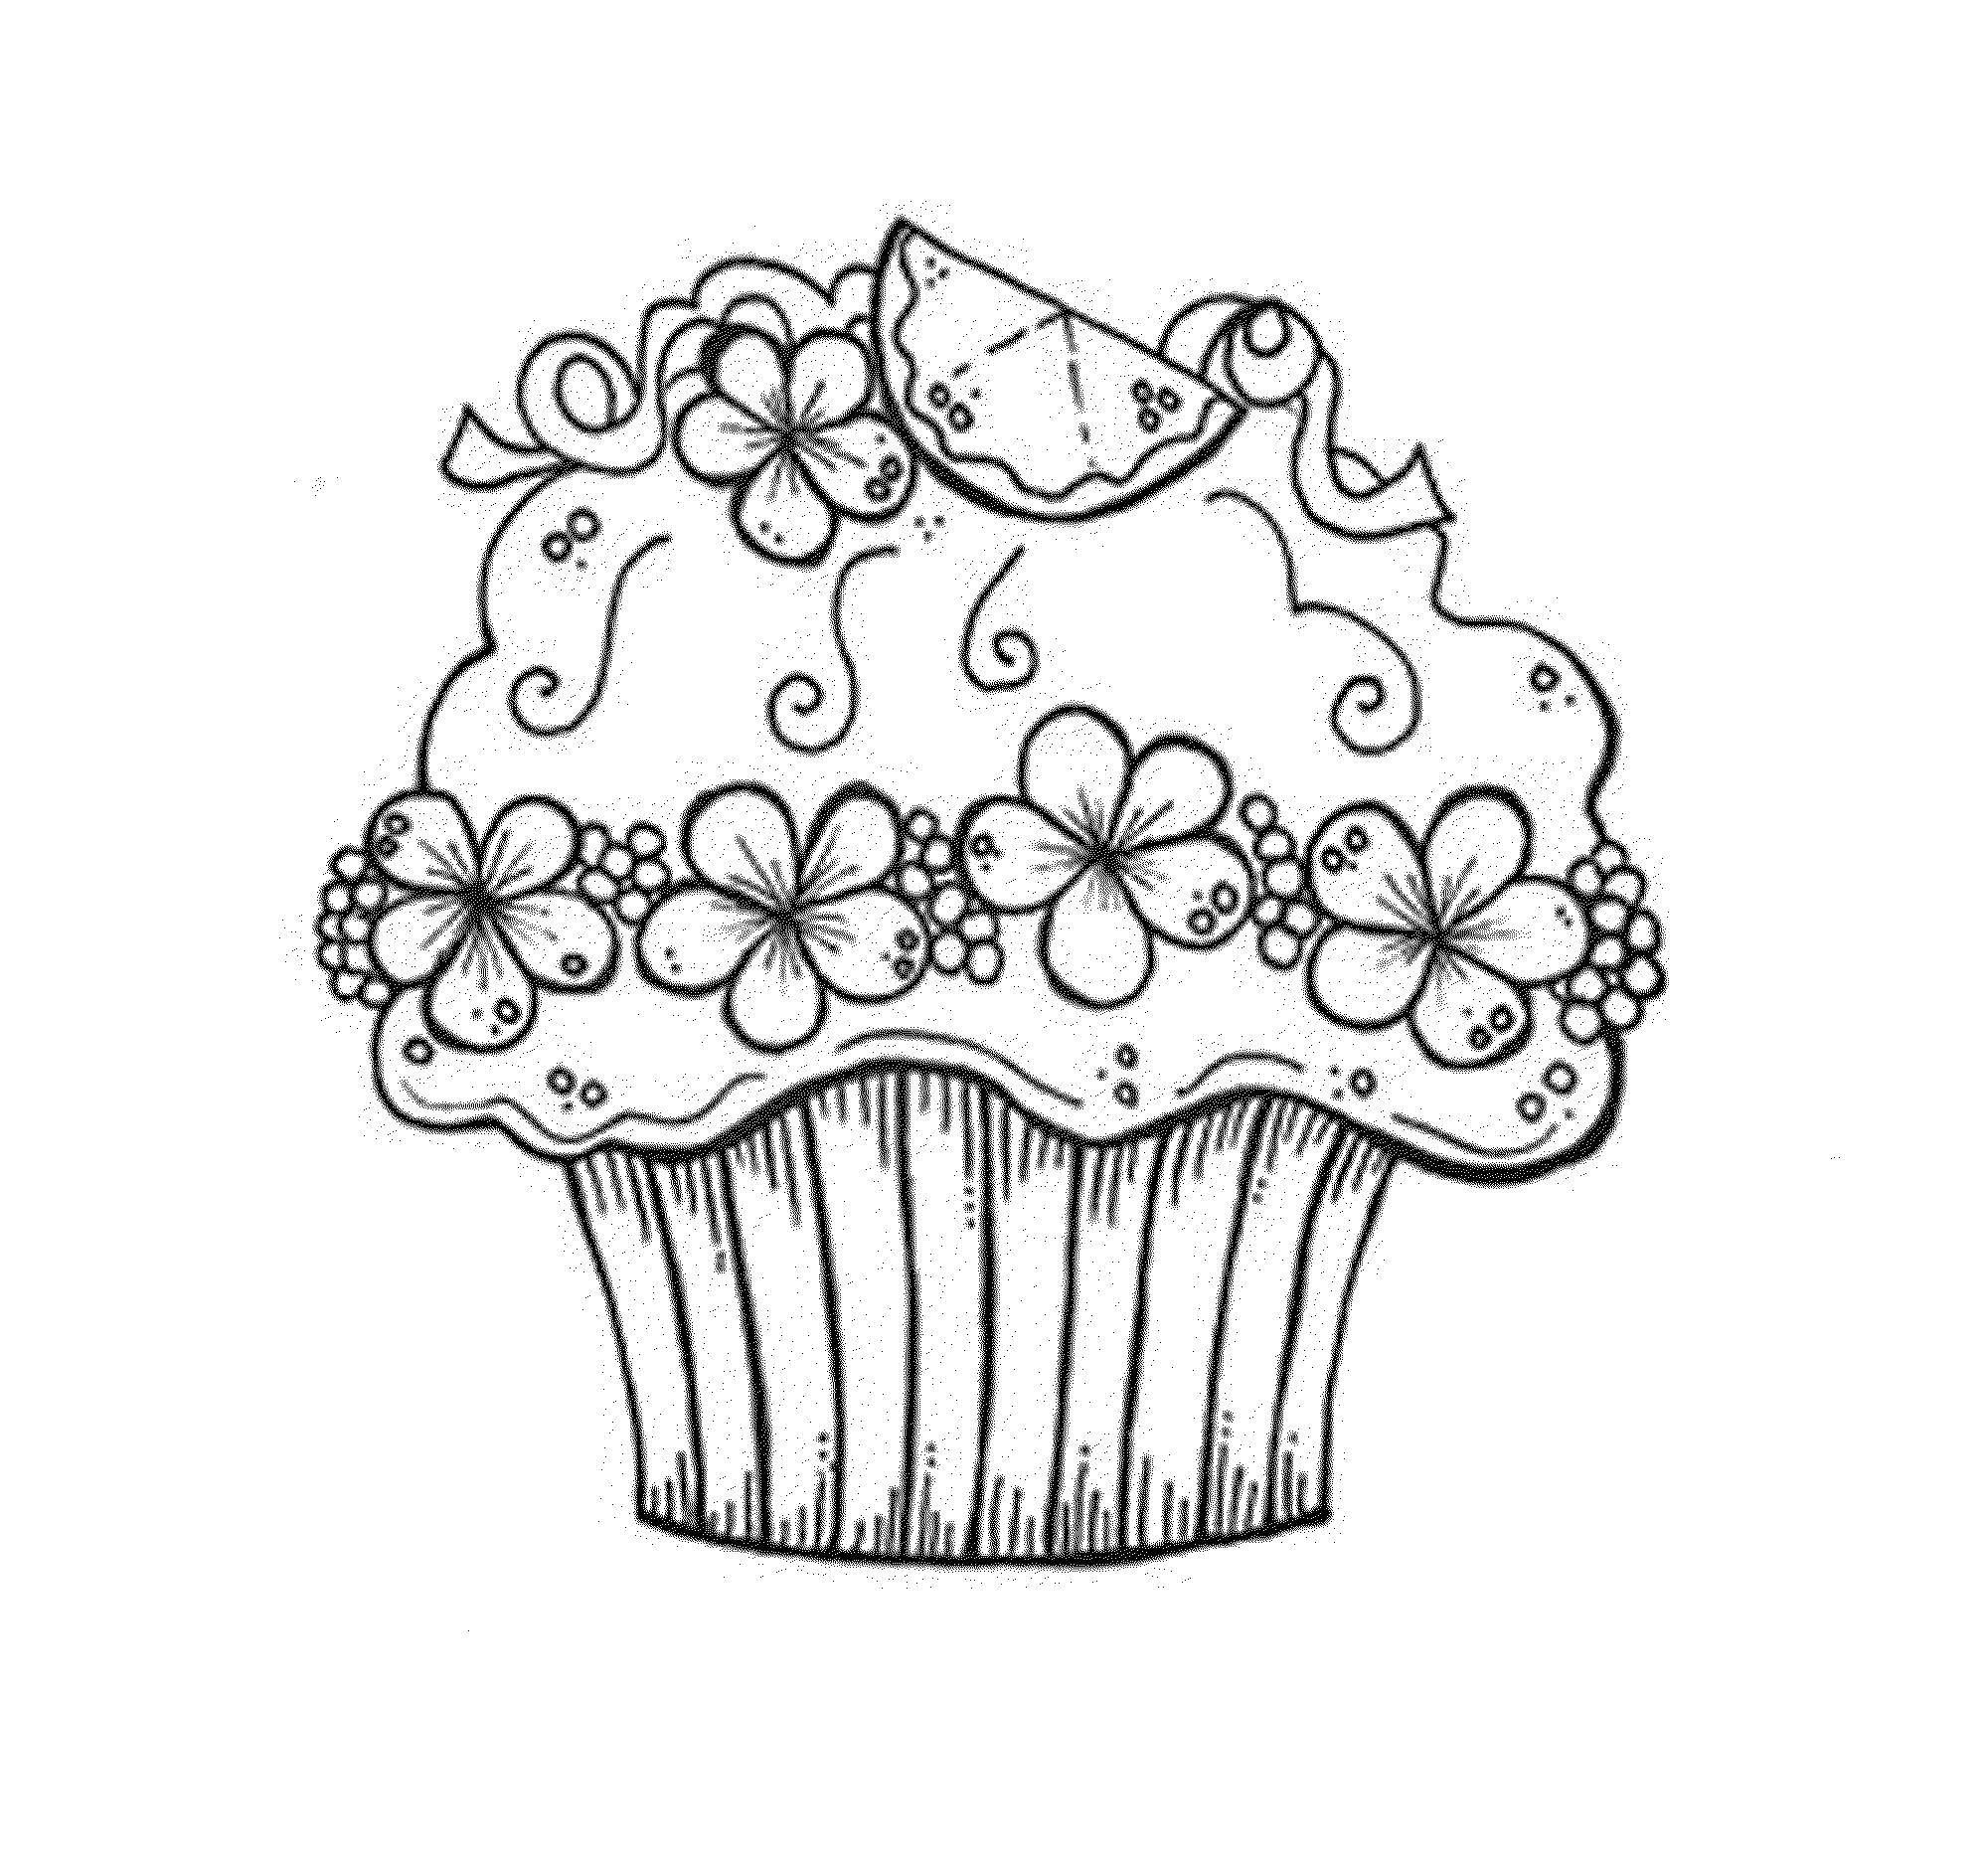 Coloring Cupcake. Category The food. Tags:  cupcake, food.